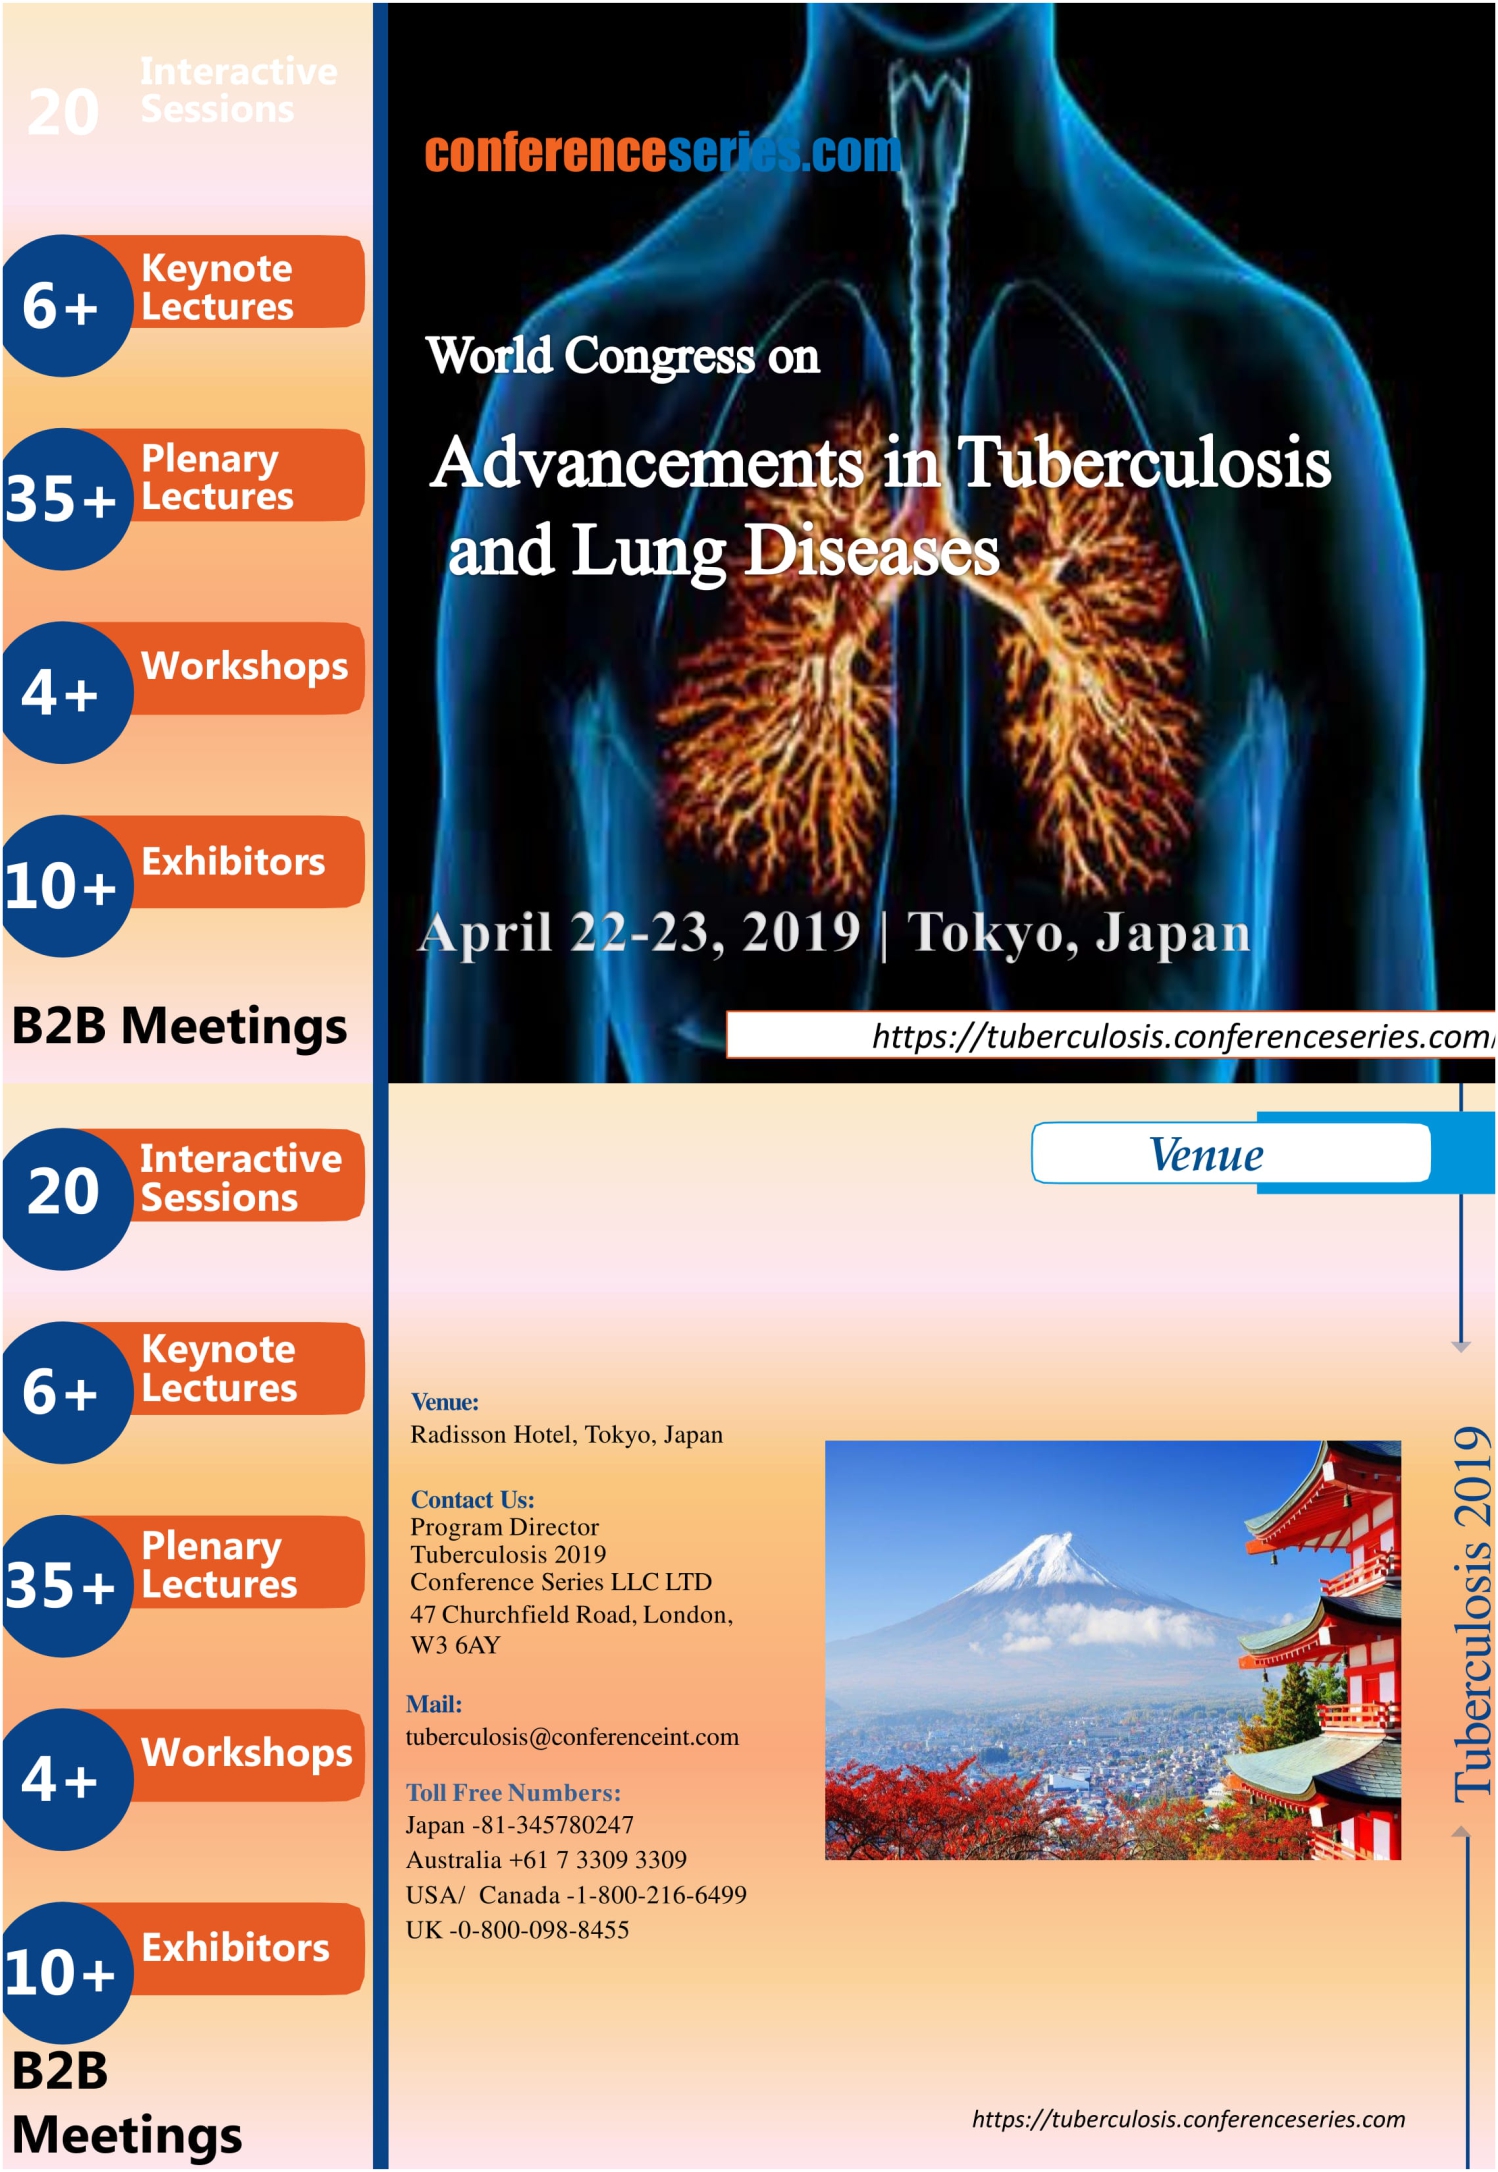 World-Congress-on-Advancements-in-Tuberculosis-and-Lung-Diseases